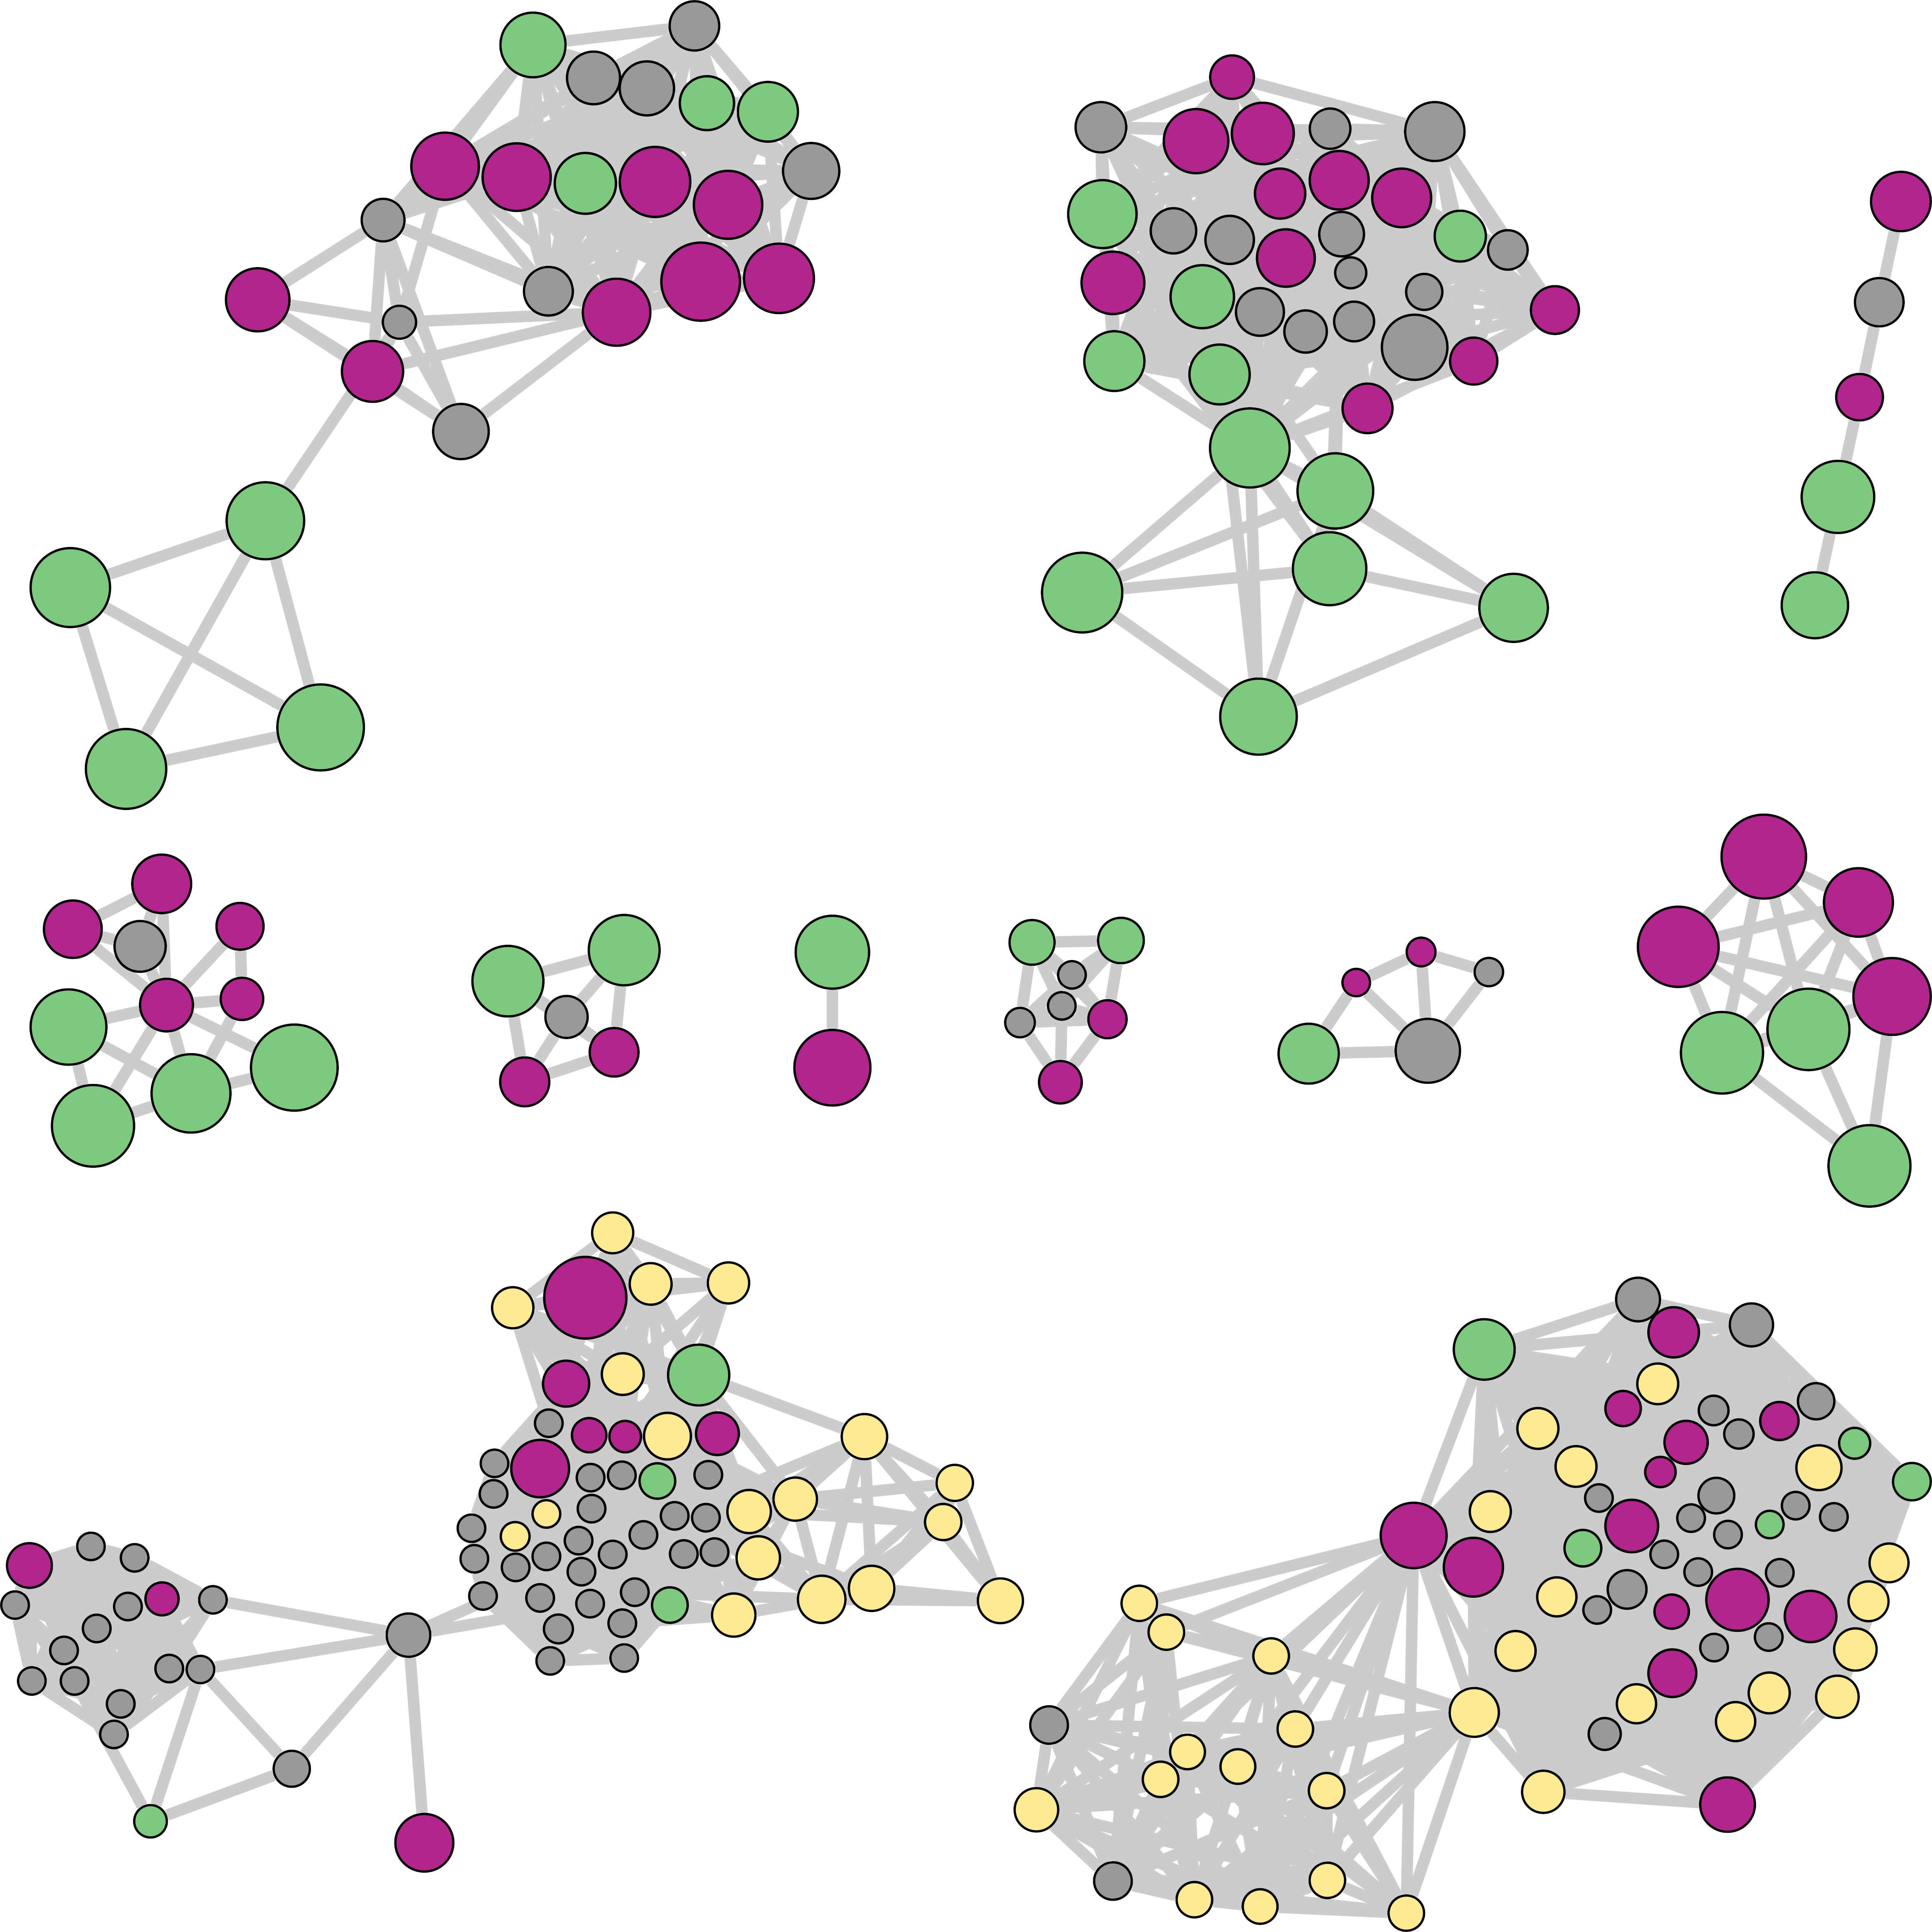 This is a network showing different colored nodes and edges. Each node represent a biosynthetic gene cluster enriched in a different site of the aerodigestive tract.